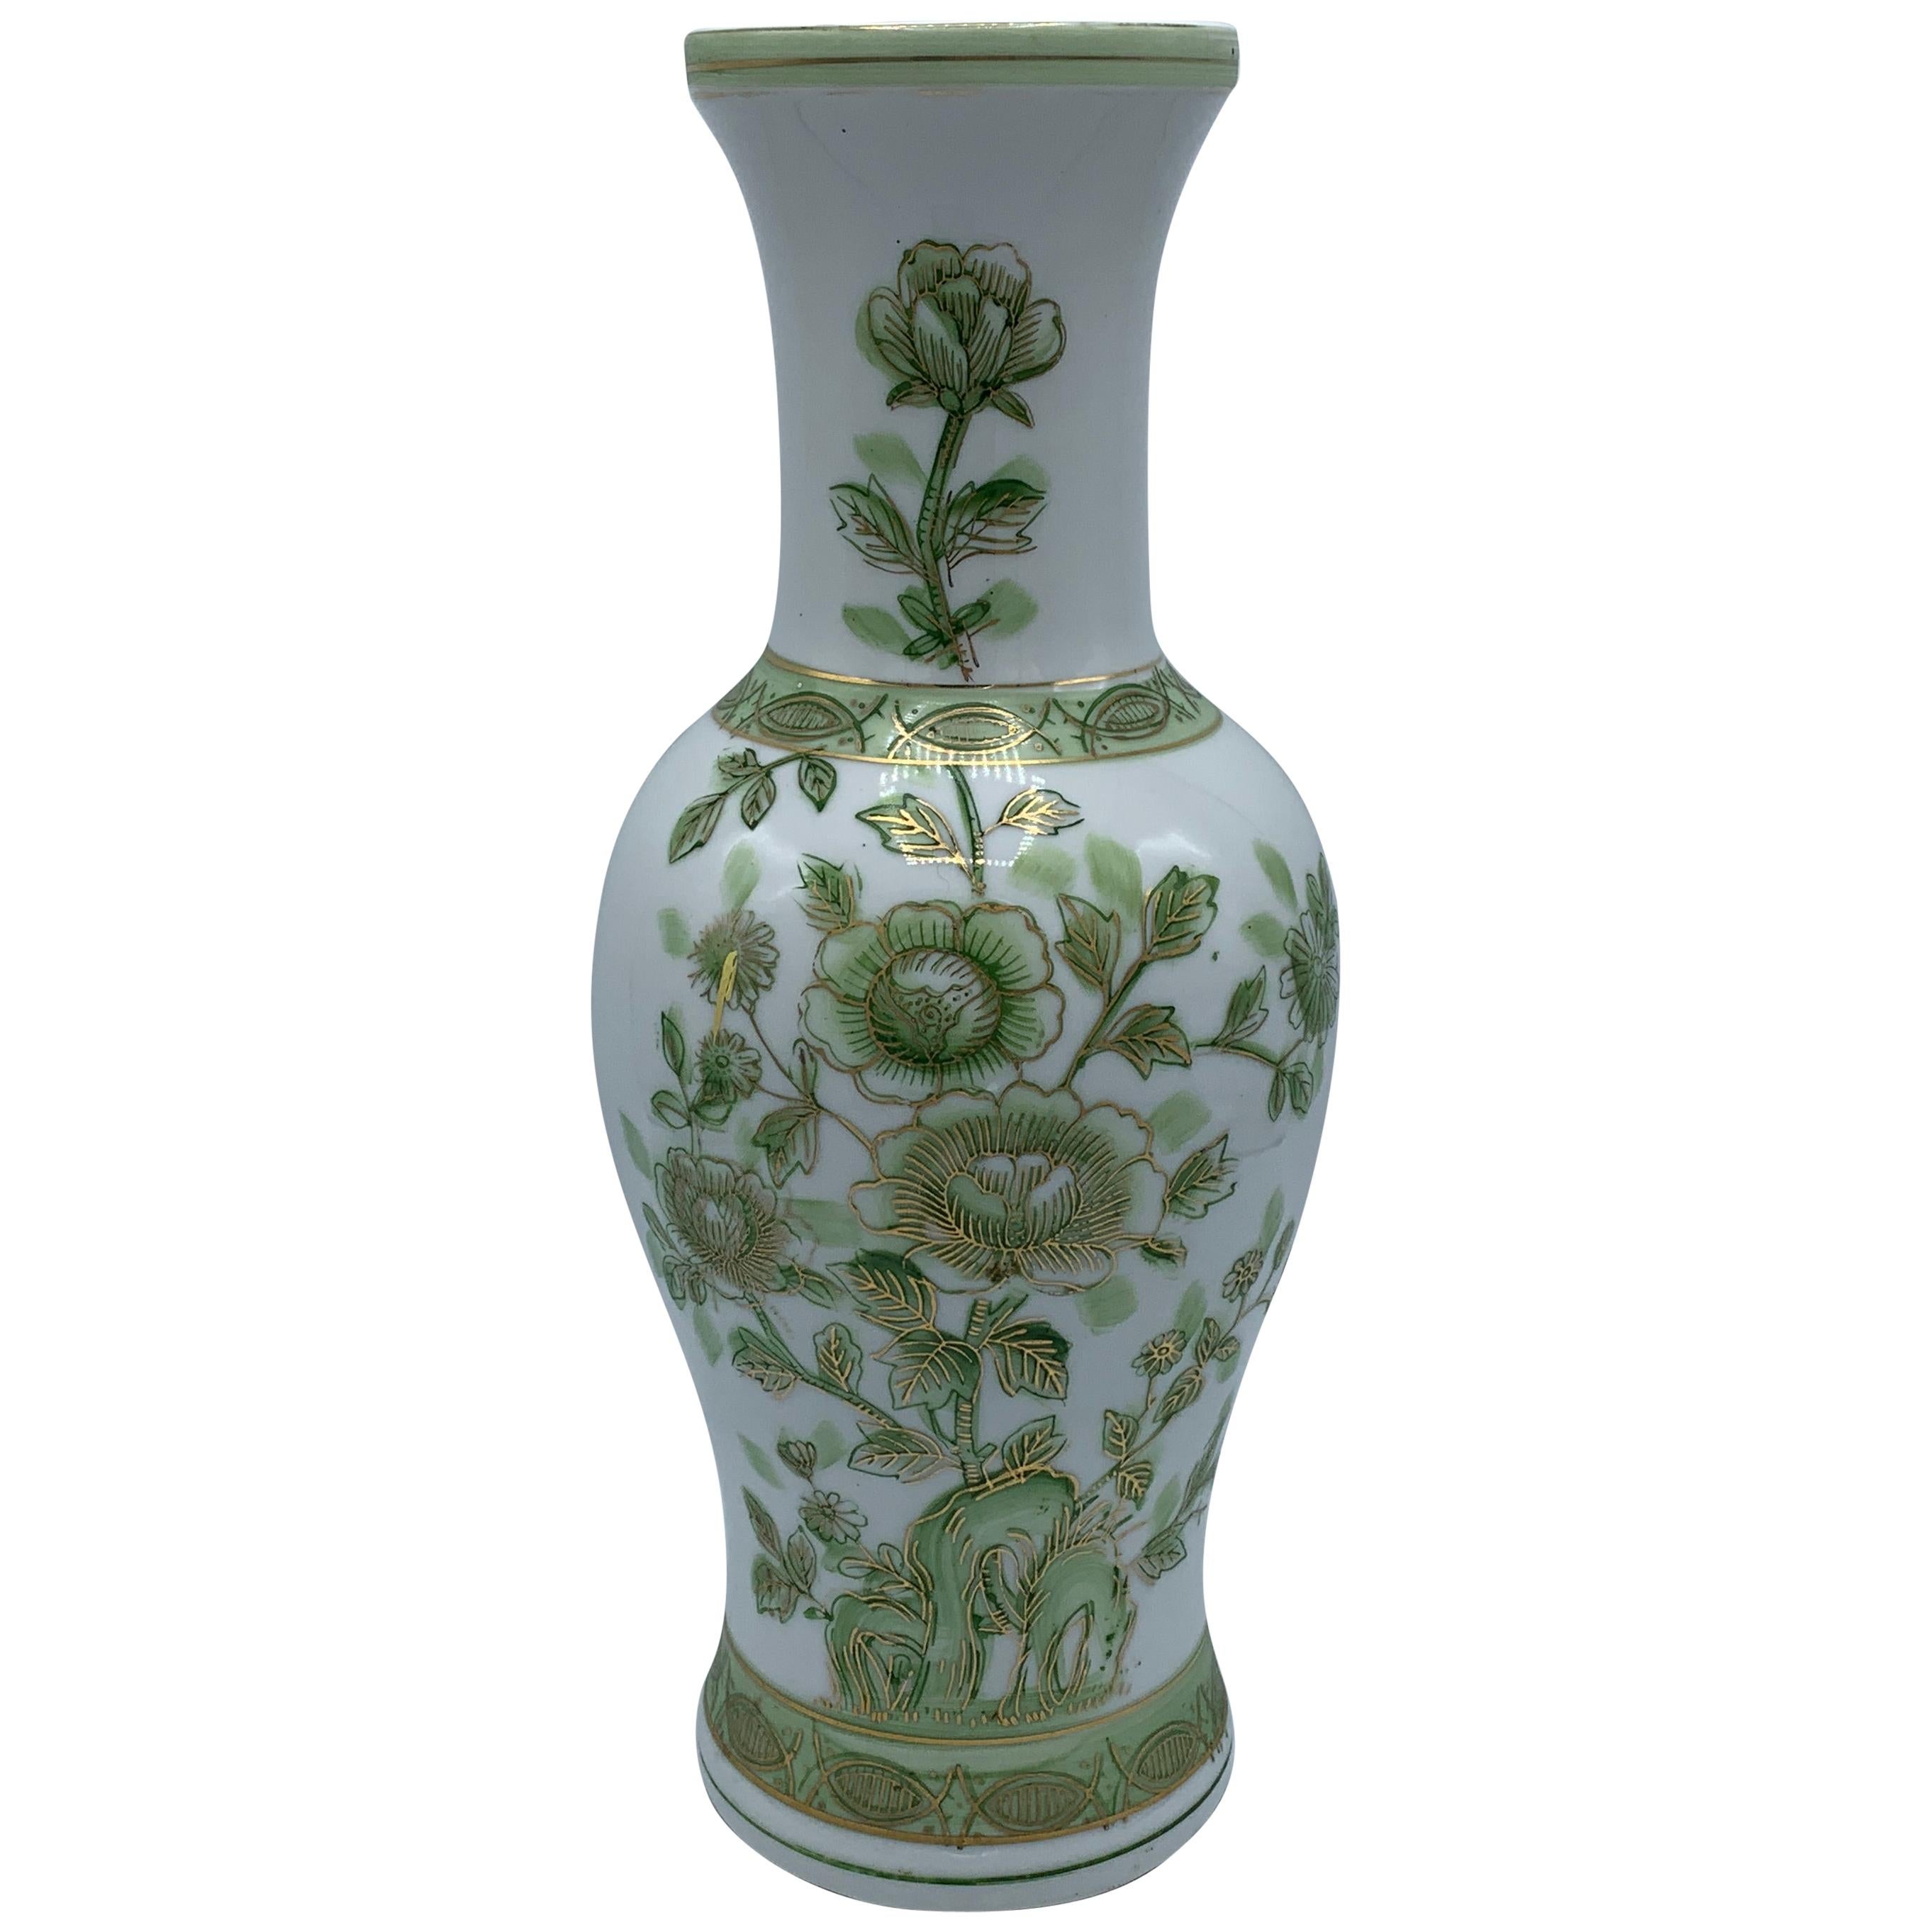 1970s Green and White Peony Motif Chinoiserie Vase